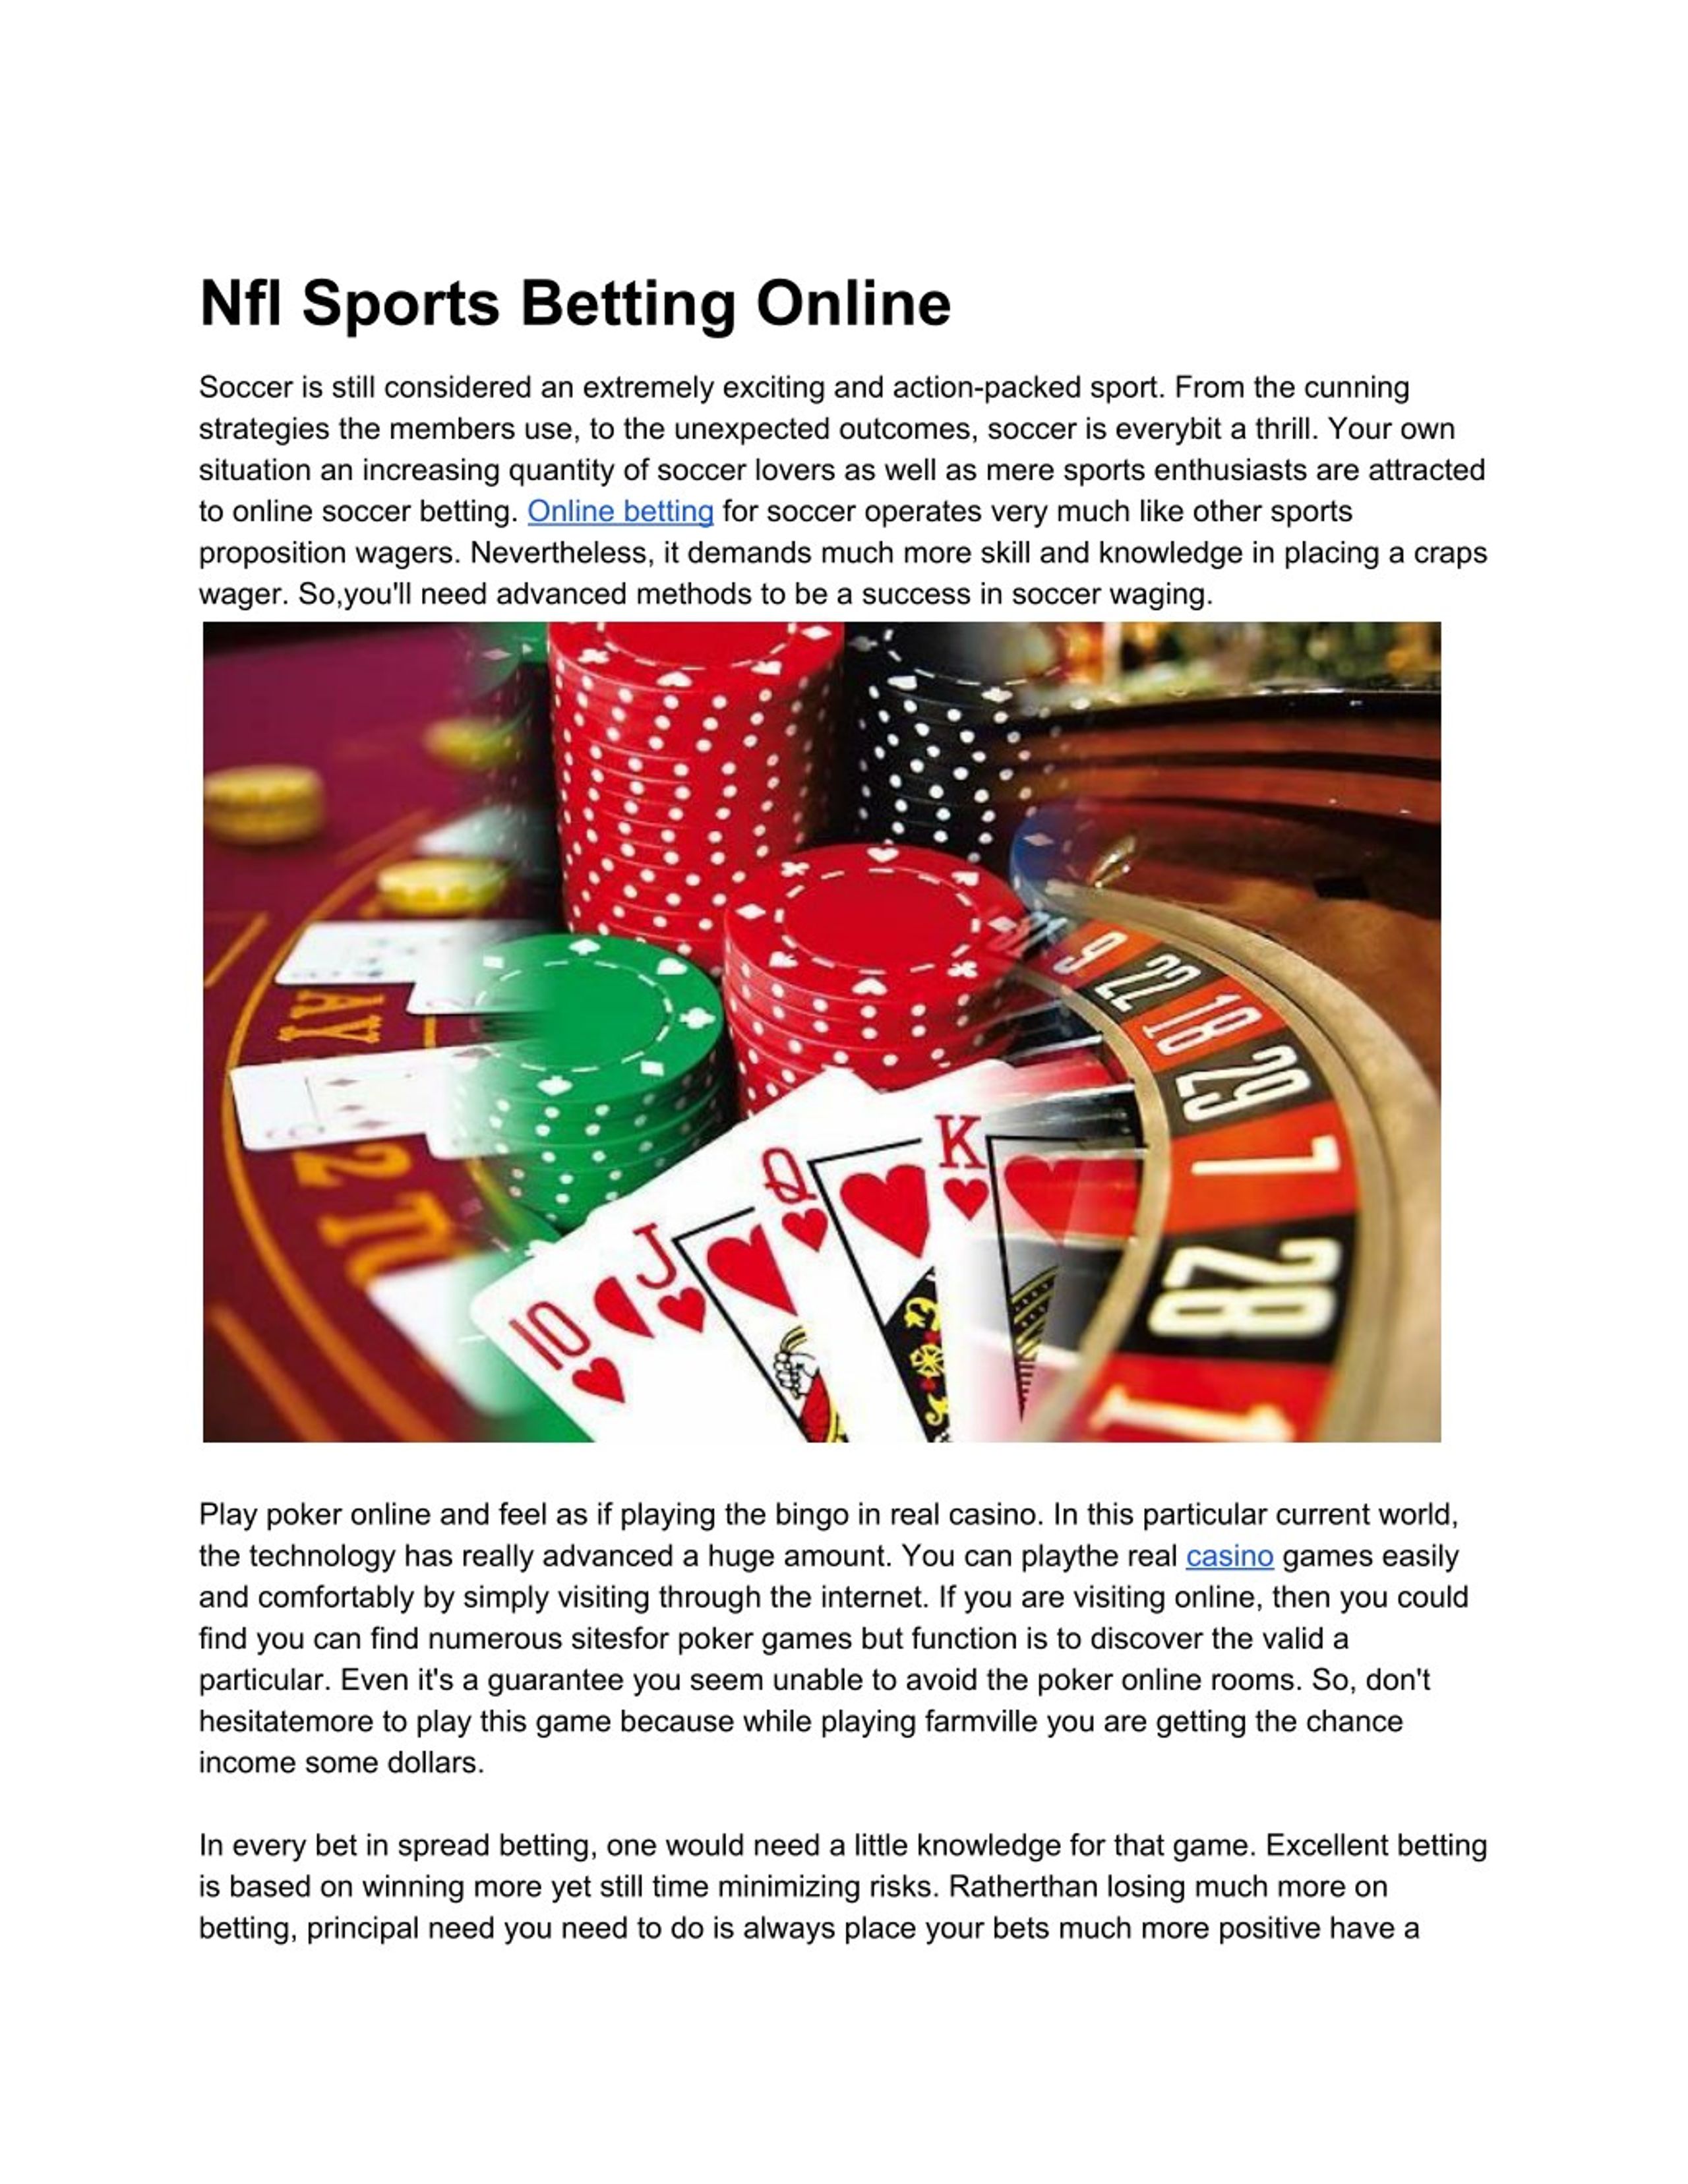 Place A Sports Bet Online